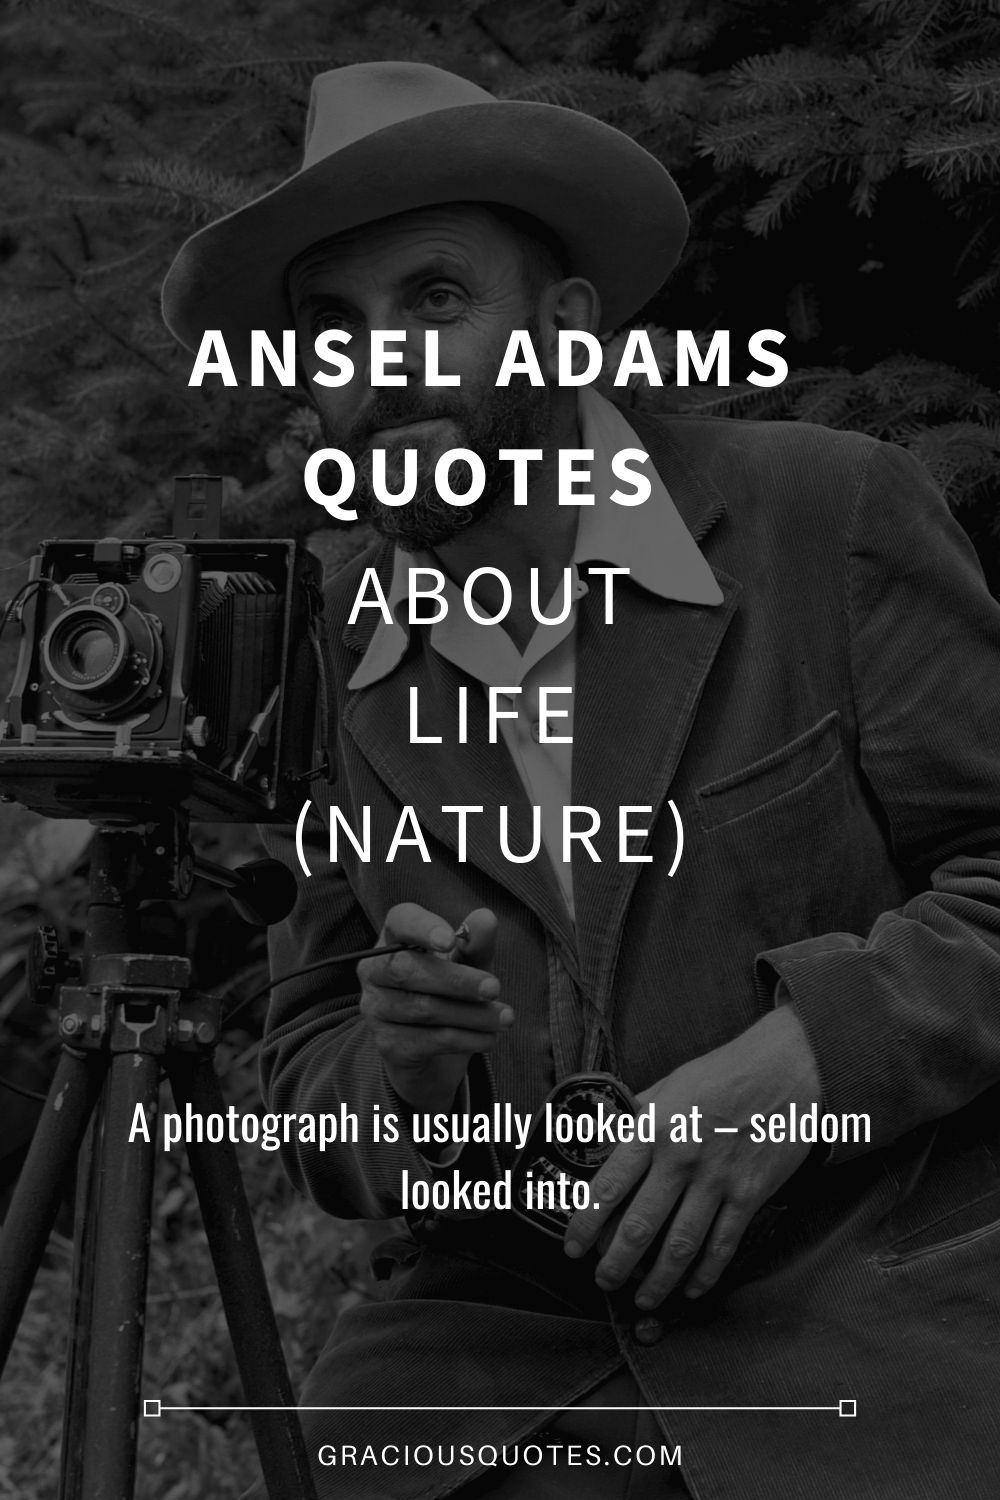 Ansel Adams Quotes About Life (NATURE) - Gracious Quotes